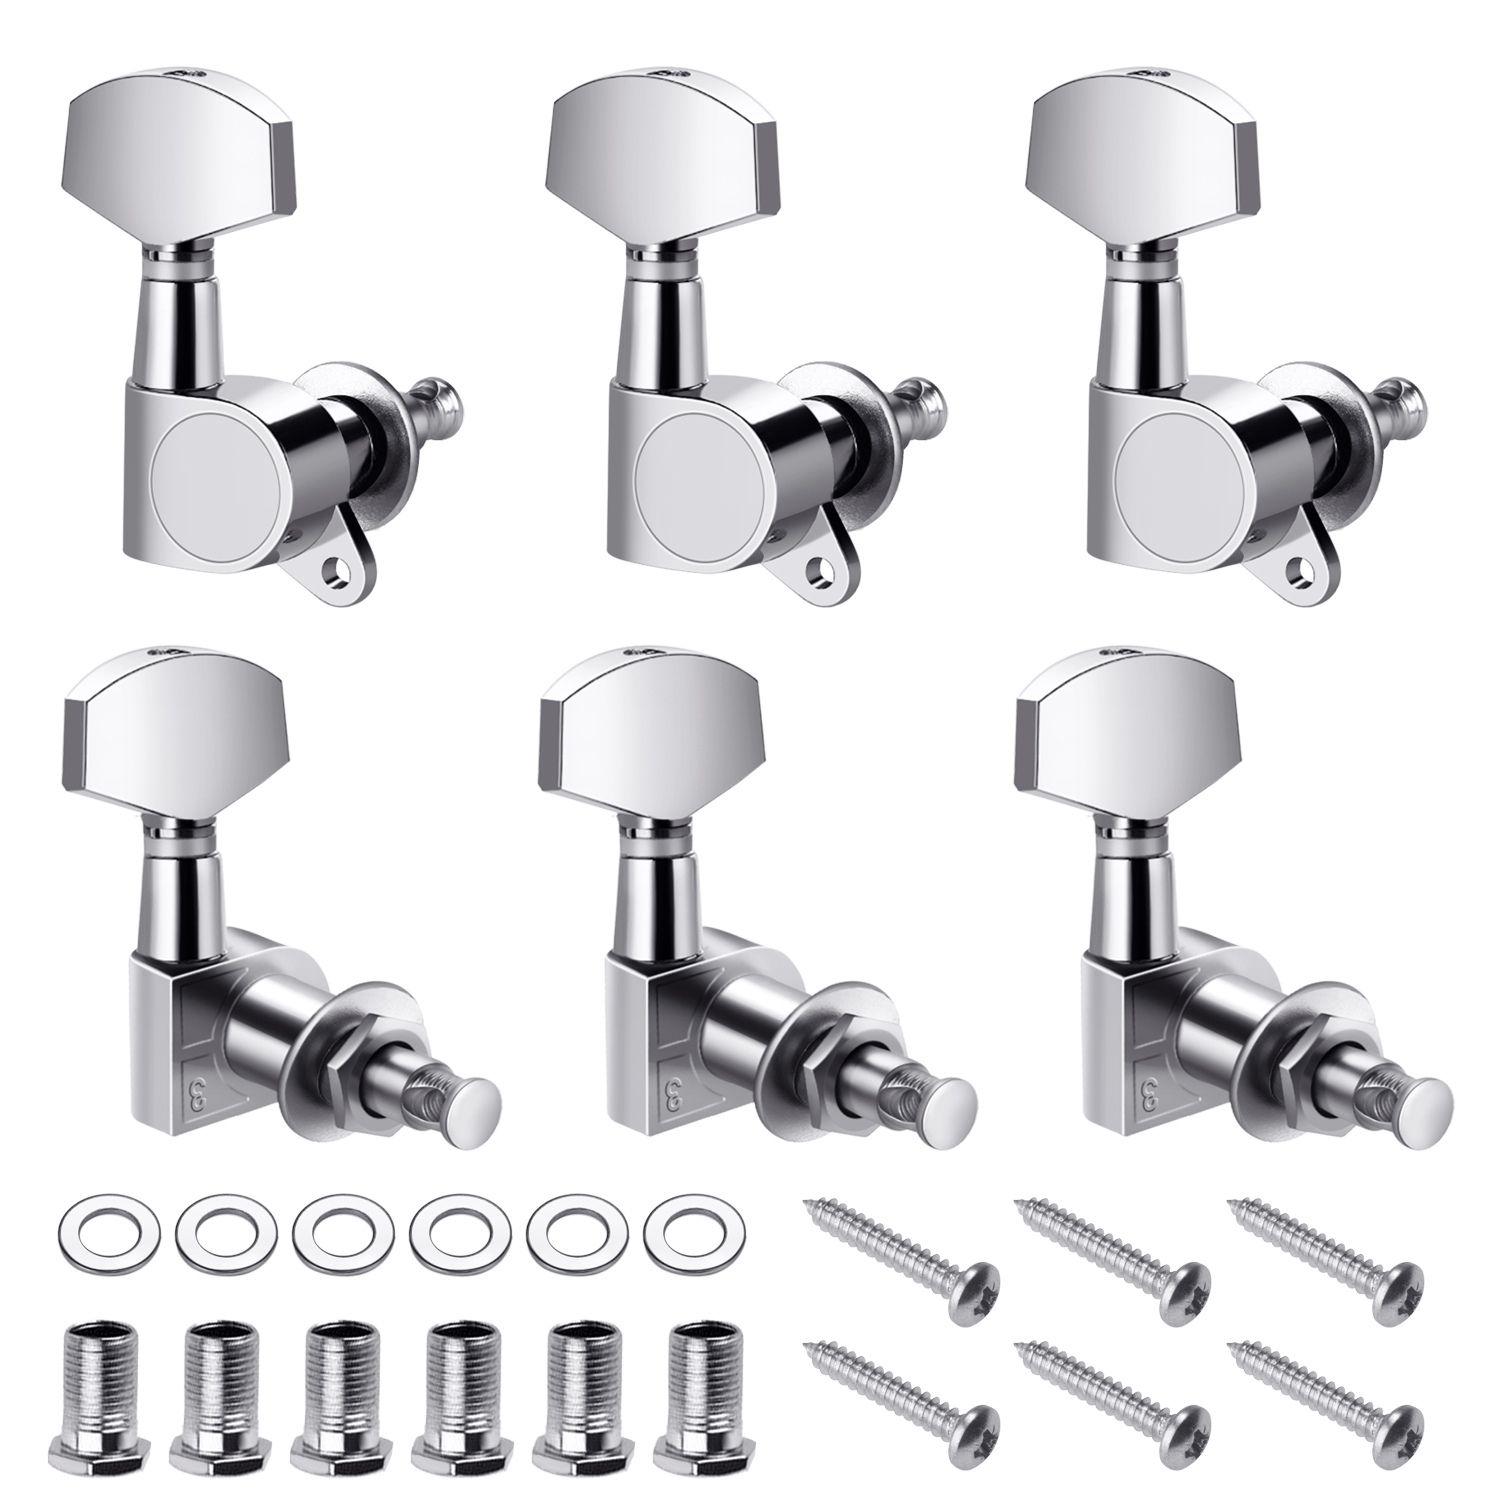 6 Chrome Guitar String Tuning Pegs Tuners Machine Heads Acoustic Electric